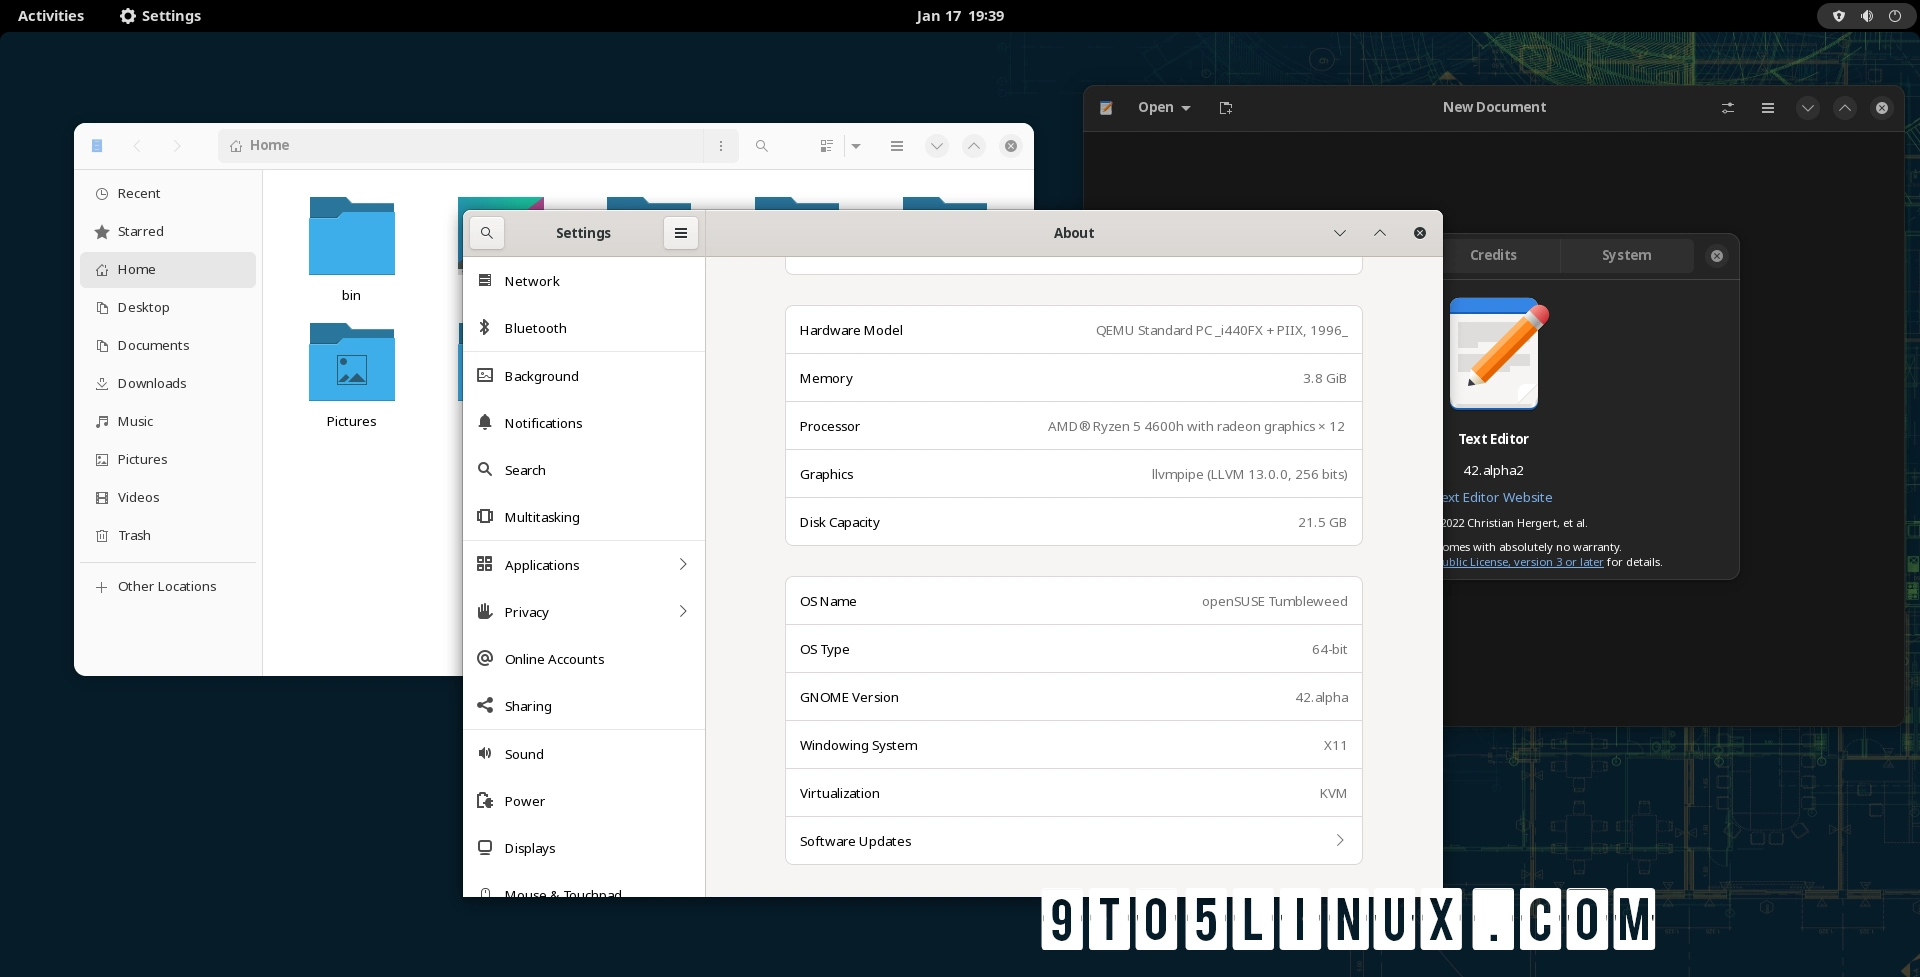 GNOME 42 Desktop Environment Is Now Available for Public Testing